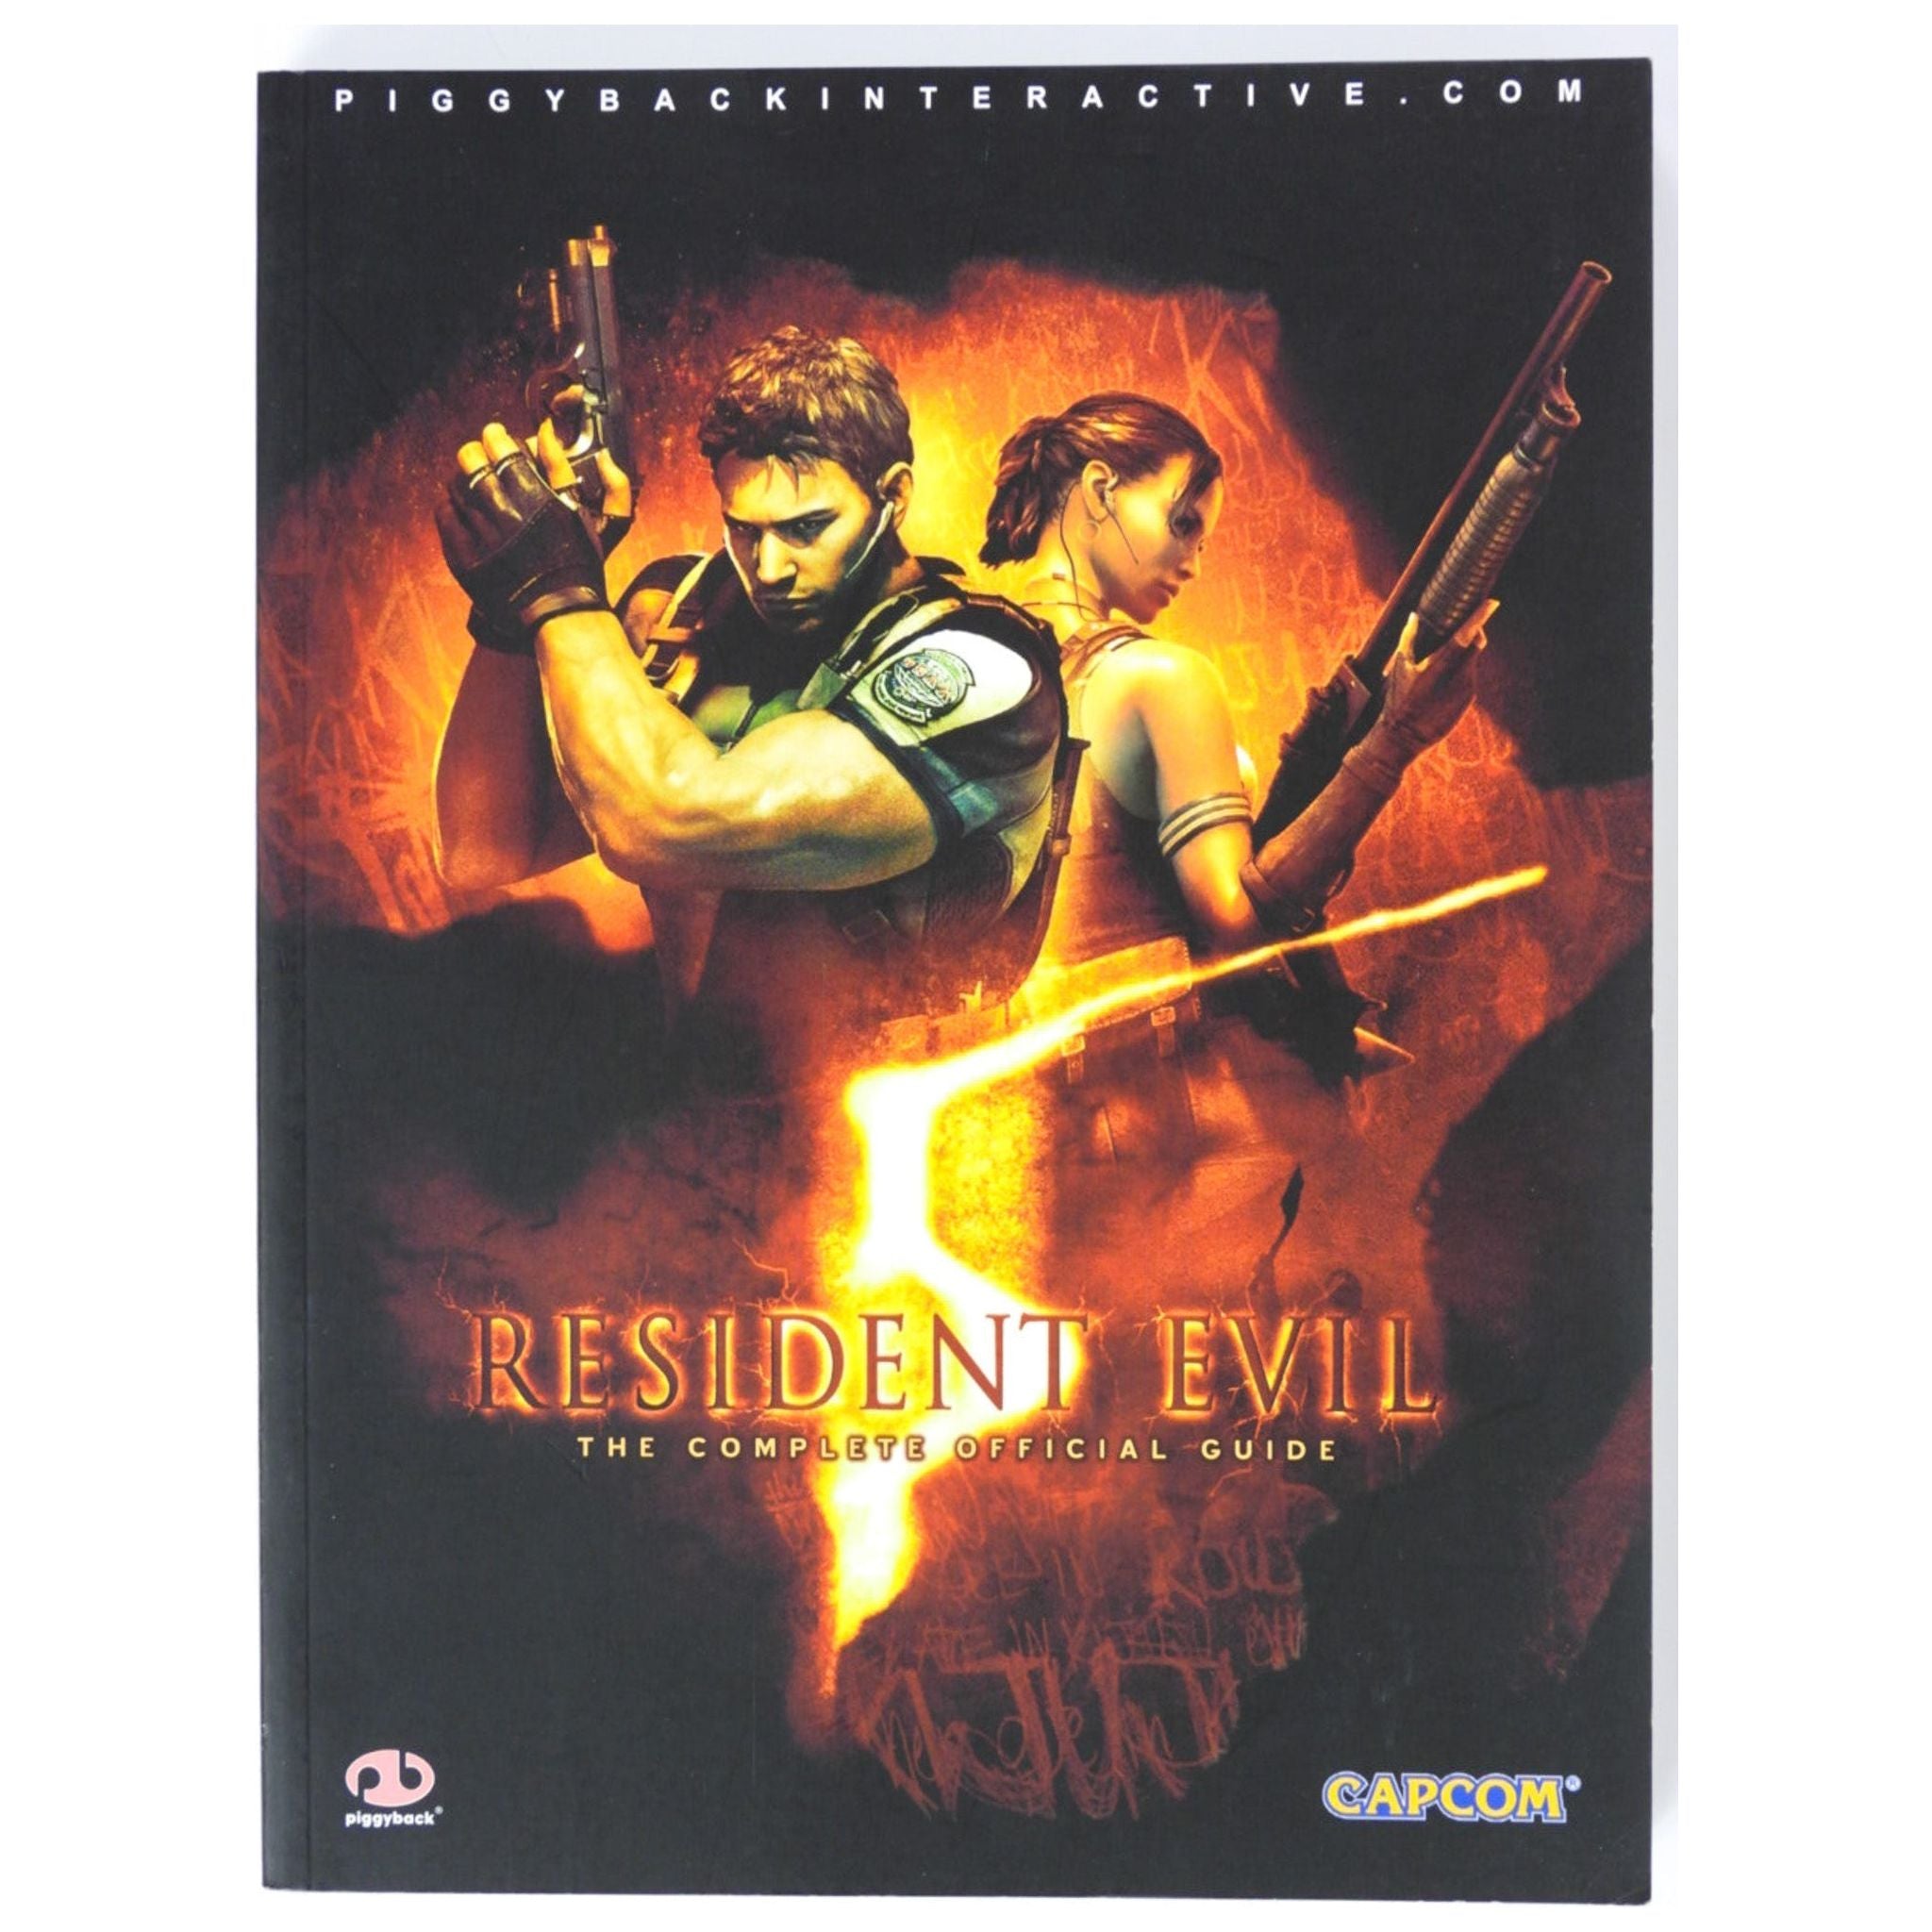 Resident Evil 5 The Complete Official Guide - Piggyback